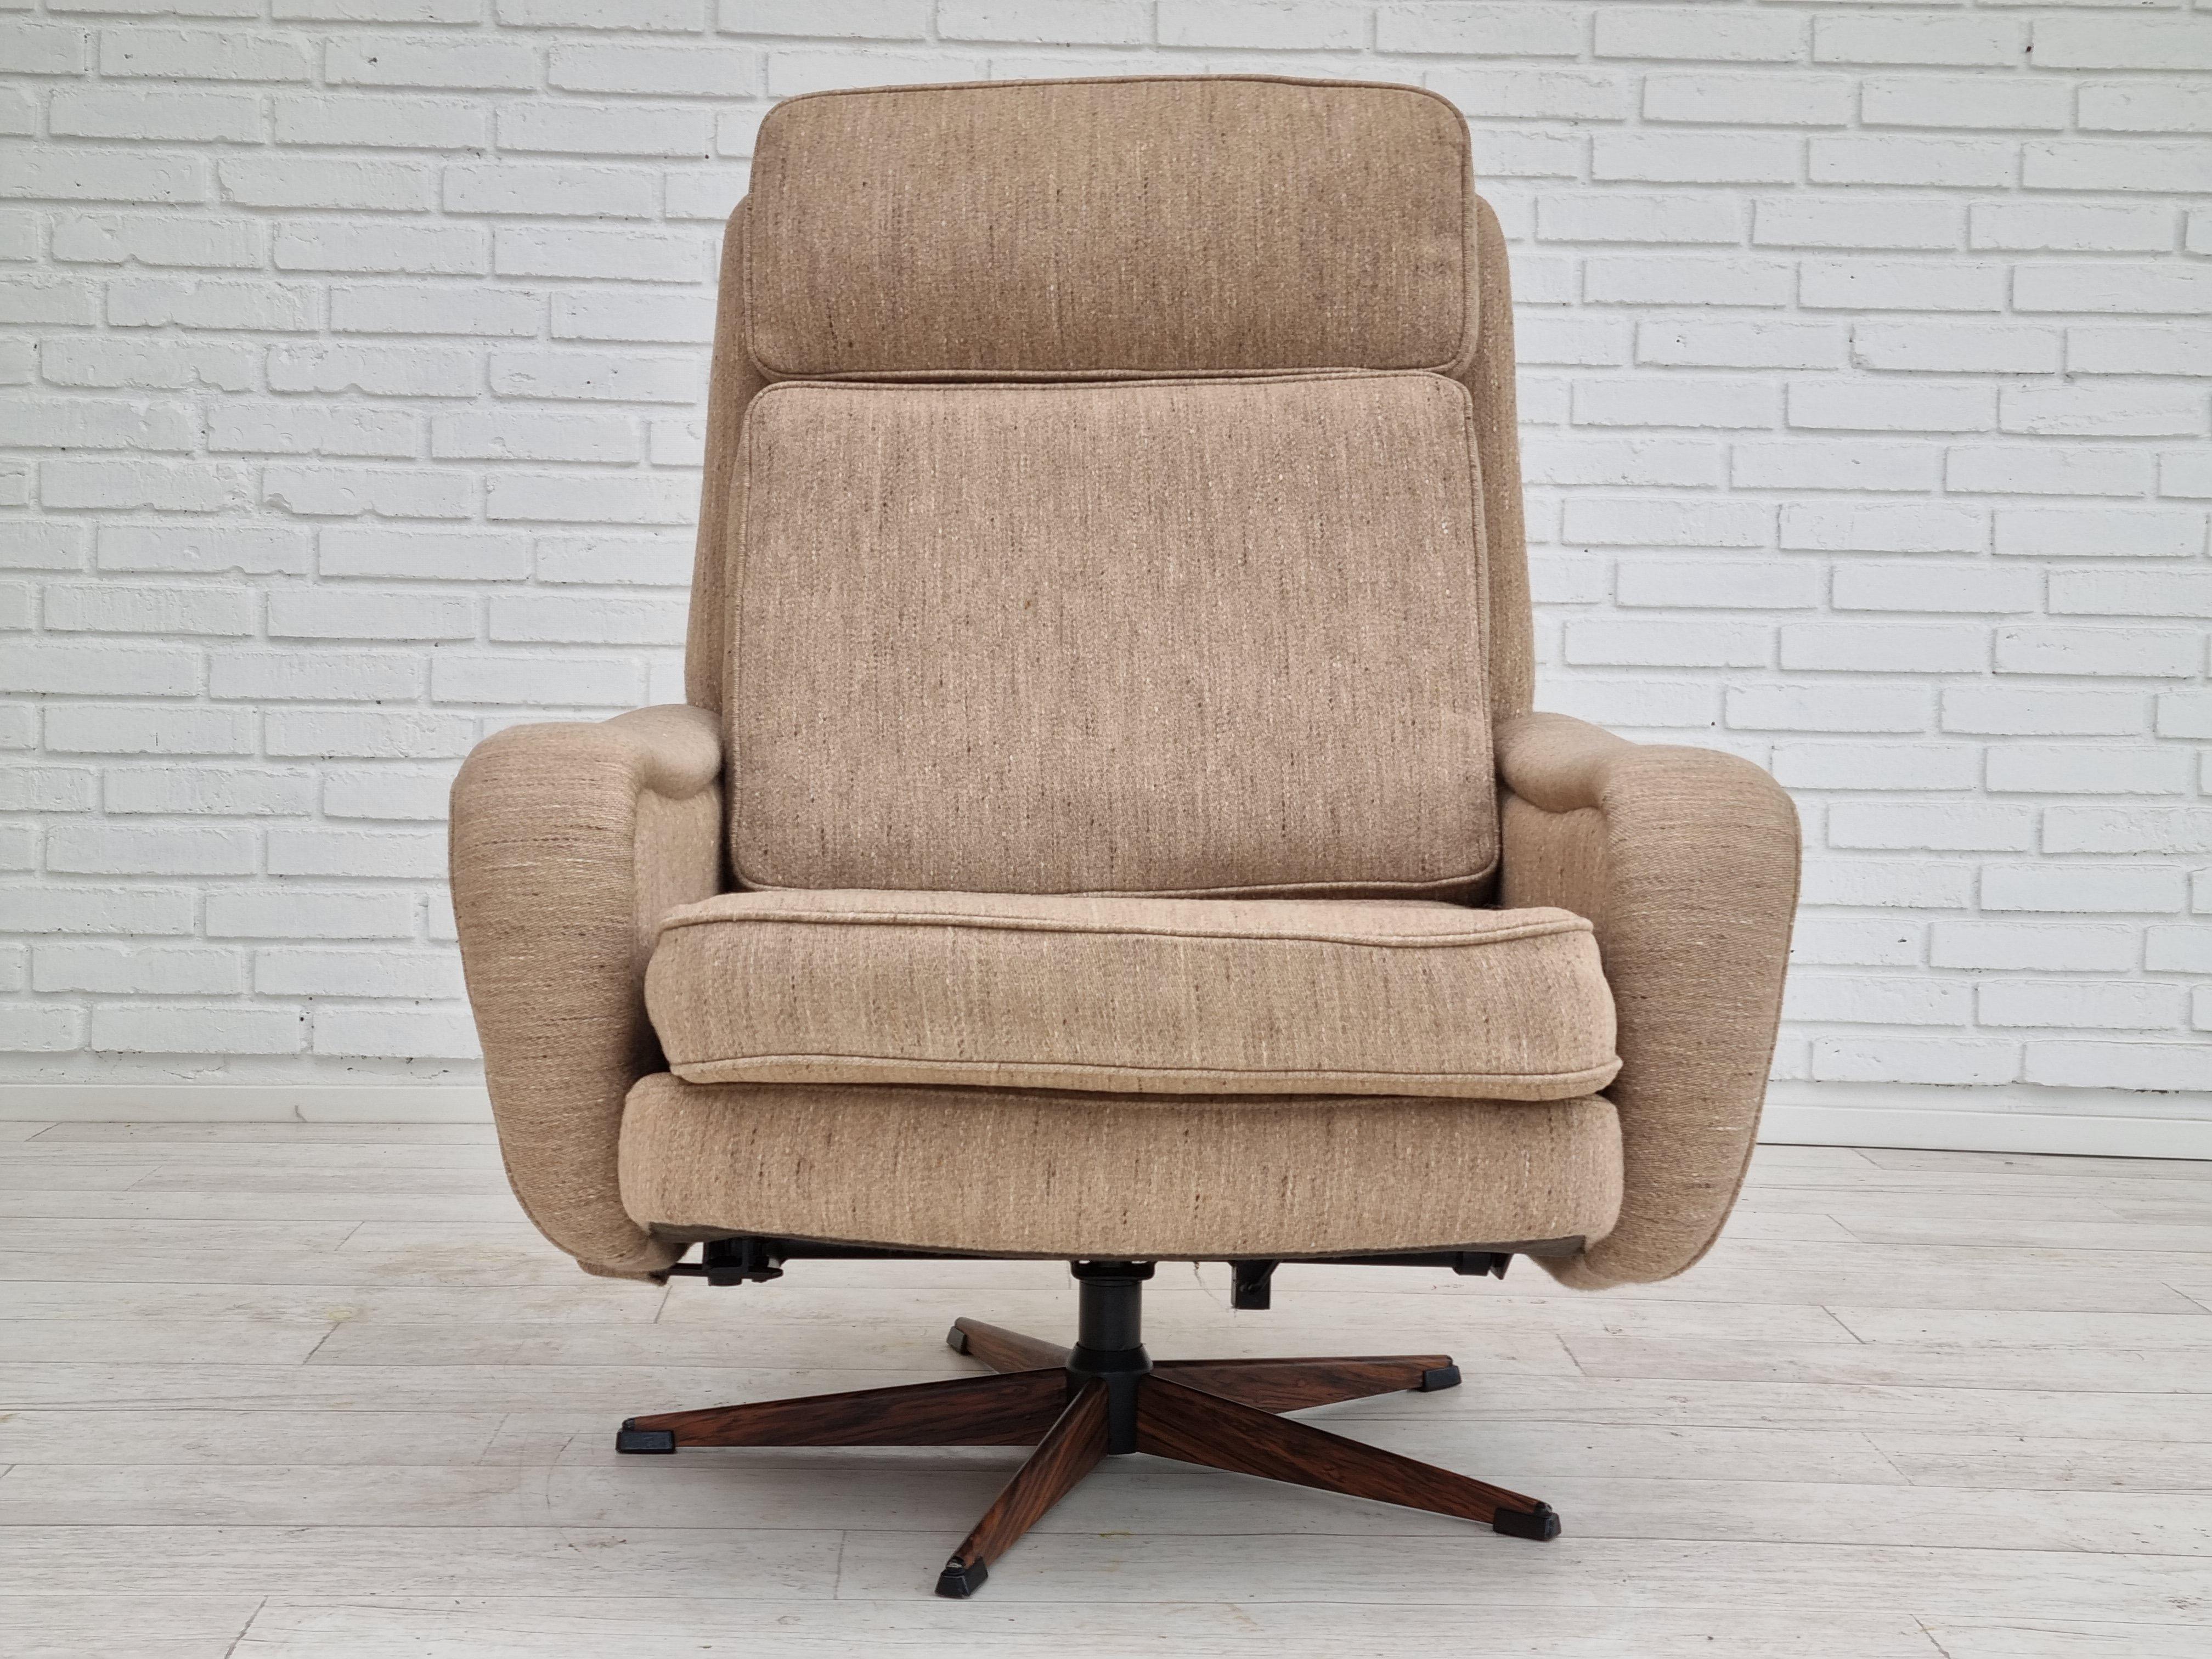 1970s, Danish Design by Madsen & Schubell, Swivel Armchair, Footstool, Wool In Good Condition For Sale In Tarm, 82